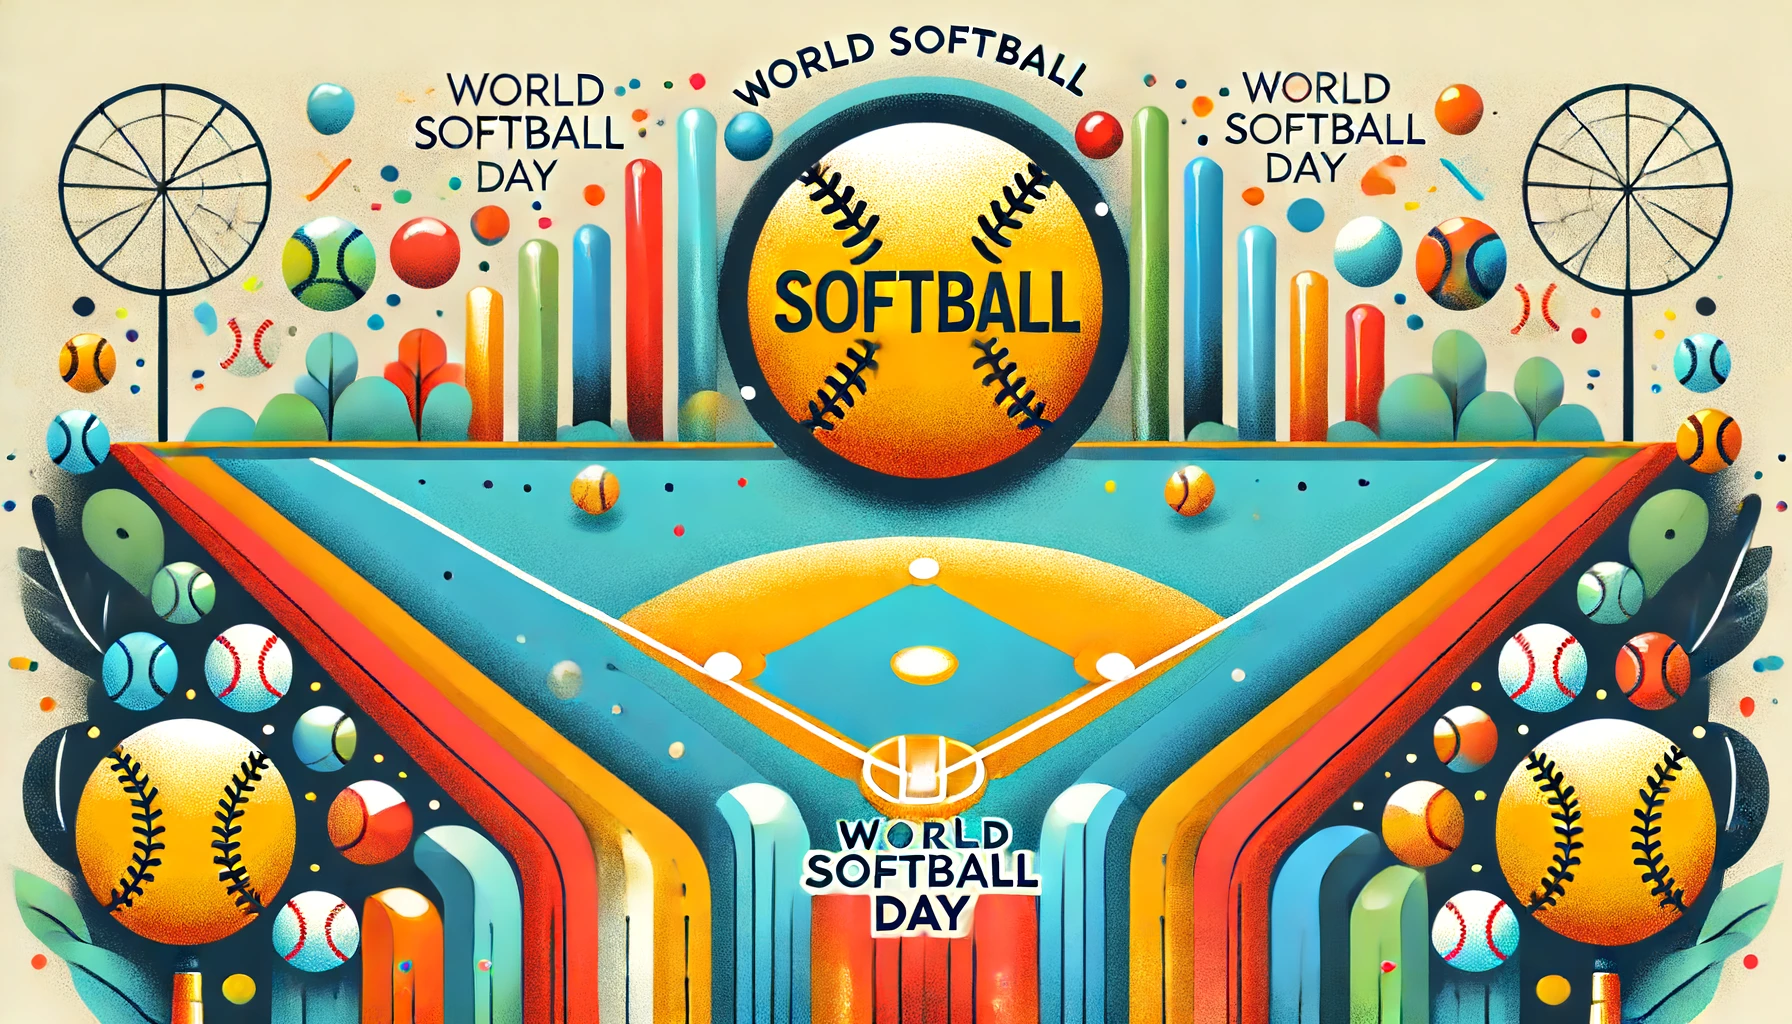 Cheering for Health and Sportsmanship on World Softball Day